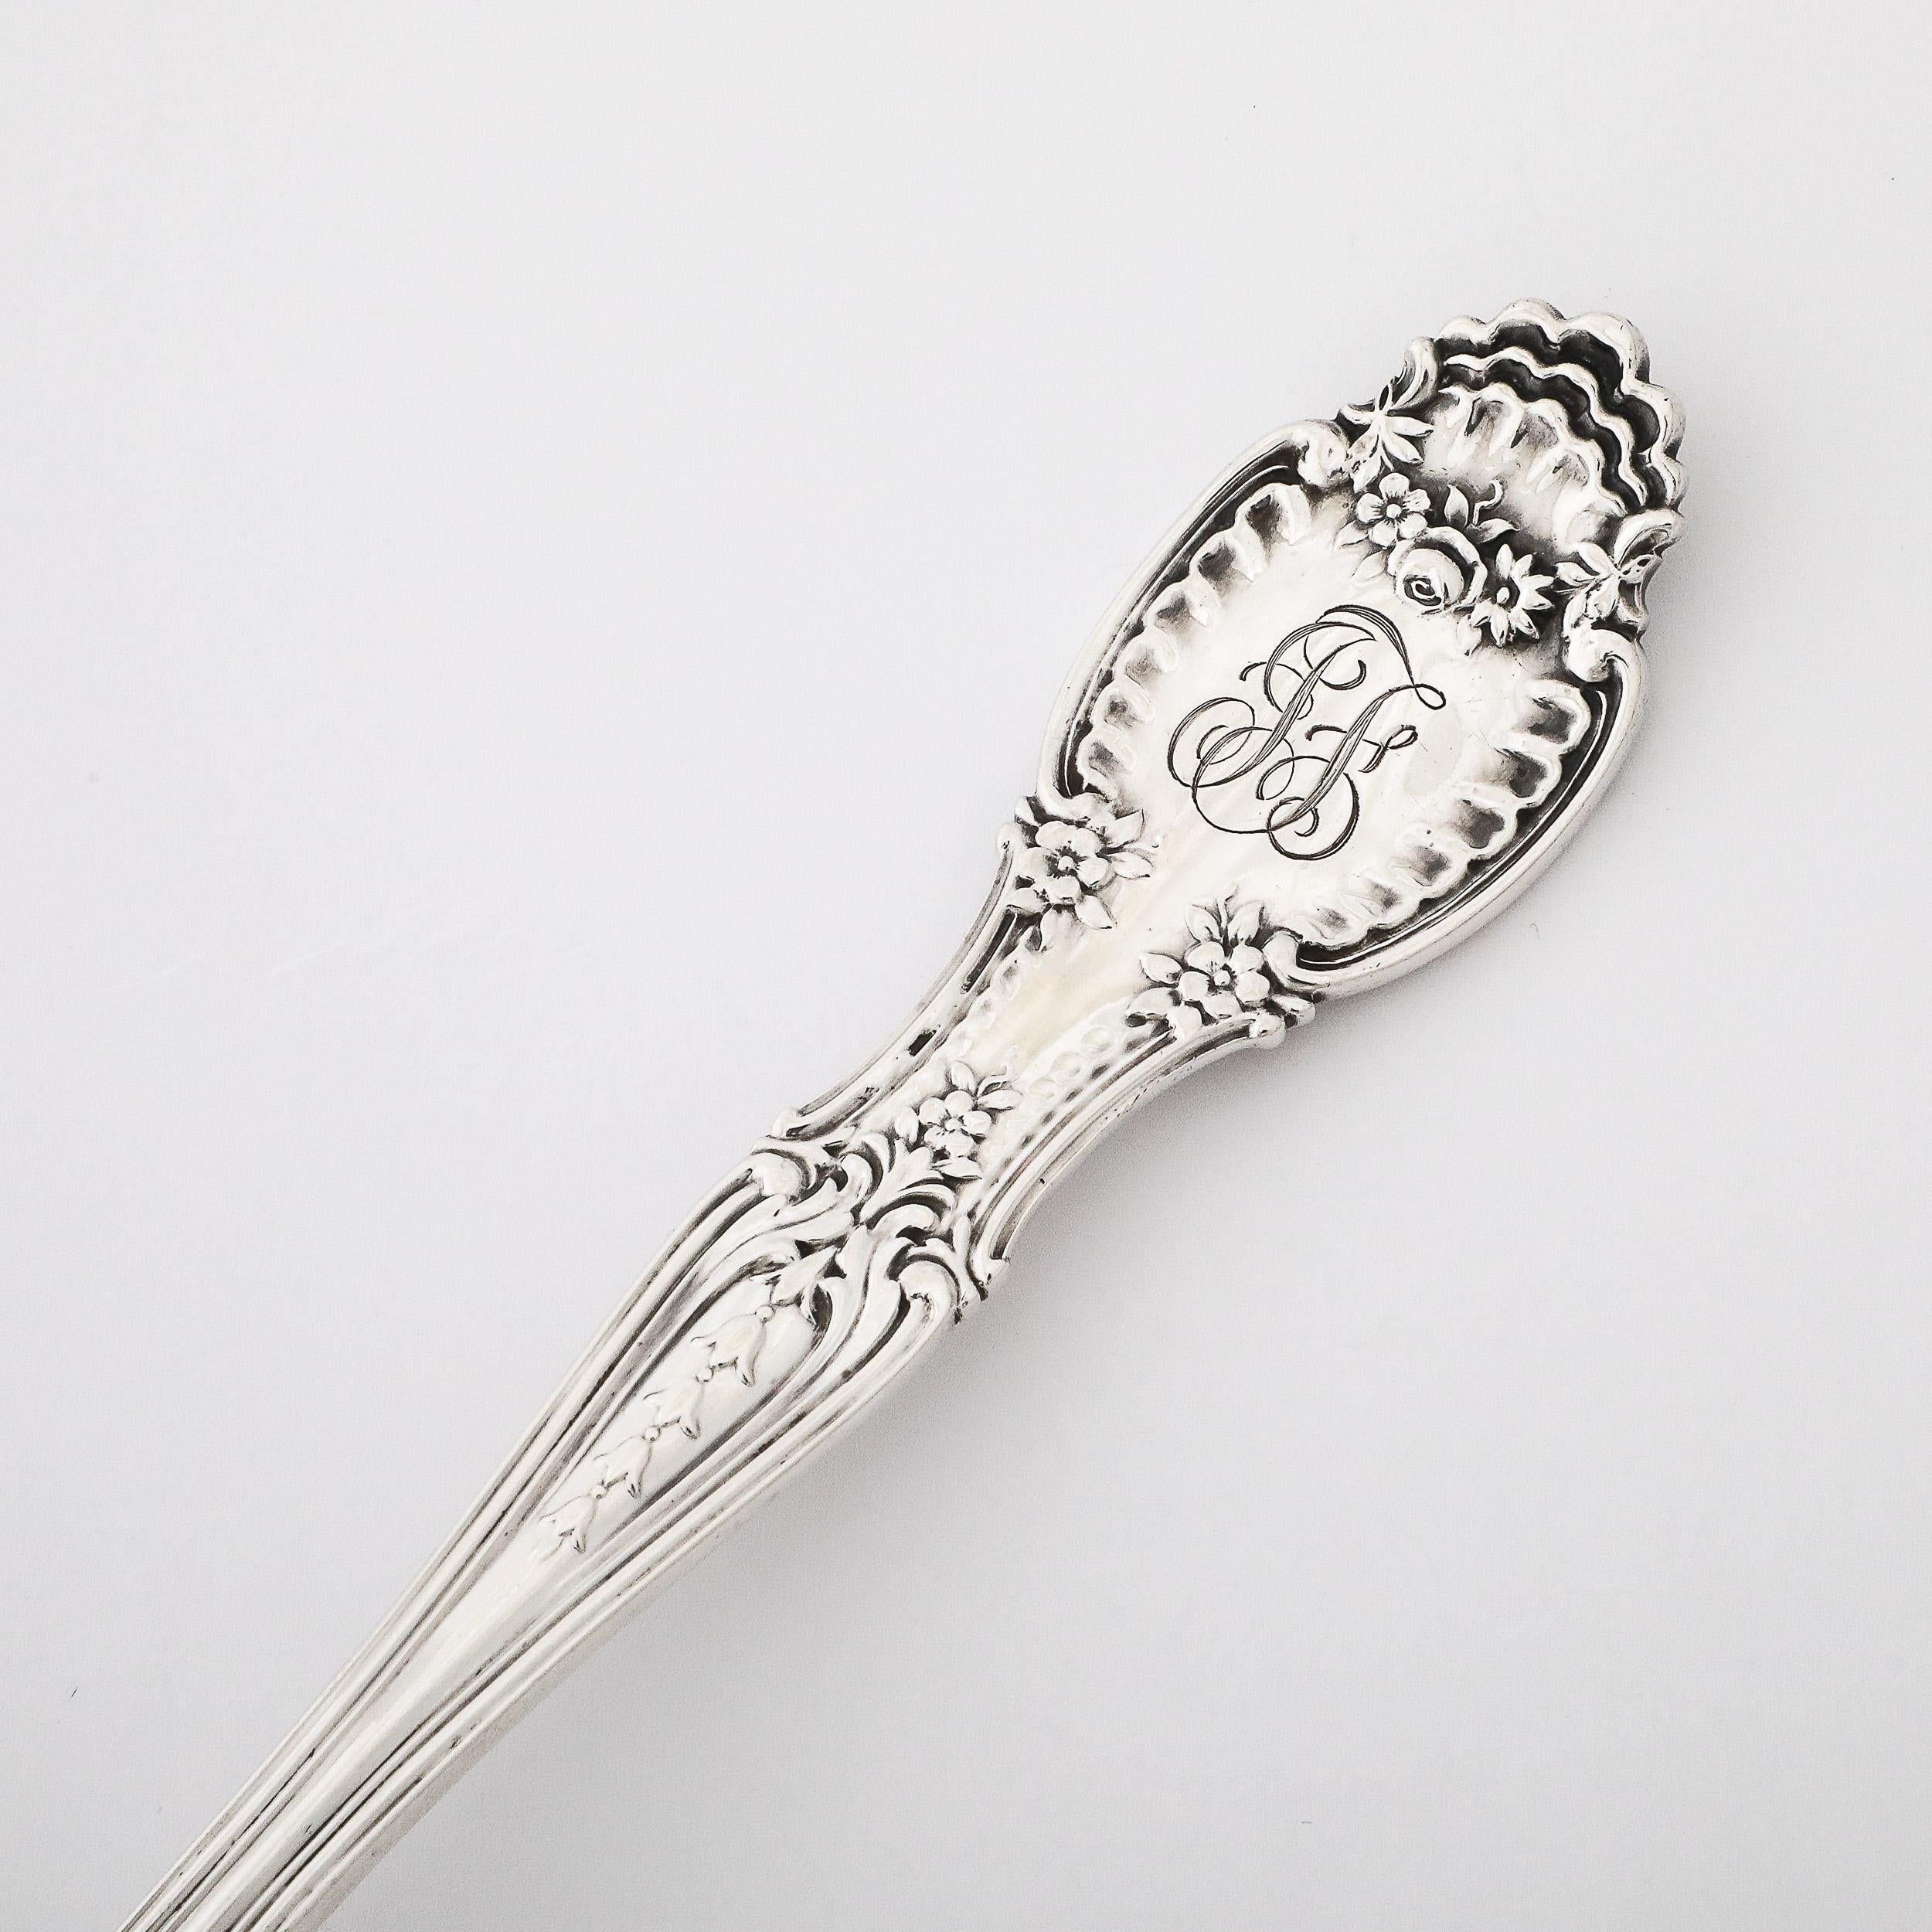 This gorgeous and gracefully achieved Tiffany and Co. 19th Century Sterling Silver Pierced Serving Spoon Pat IX95 T in Scalloped Floral Pattern originates from the United States during the Late 19th Century. Features an incredible degree of